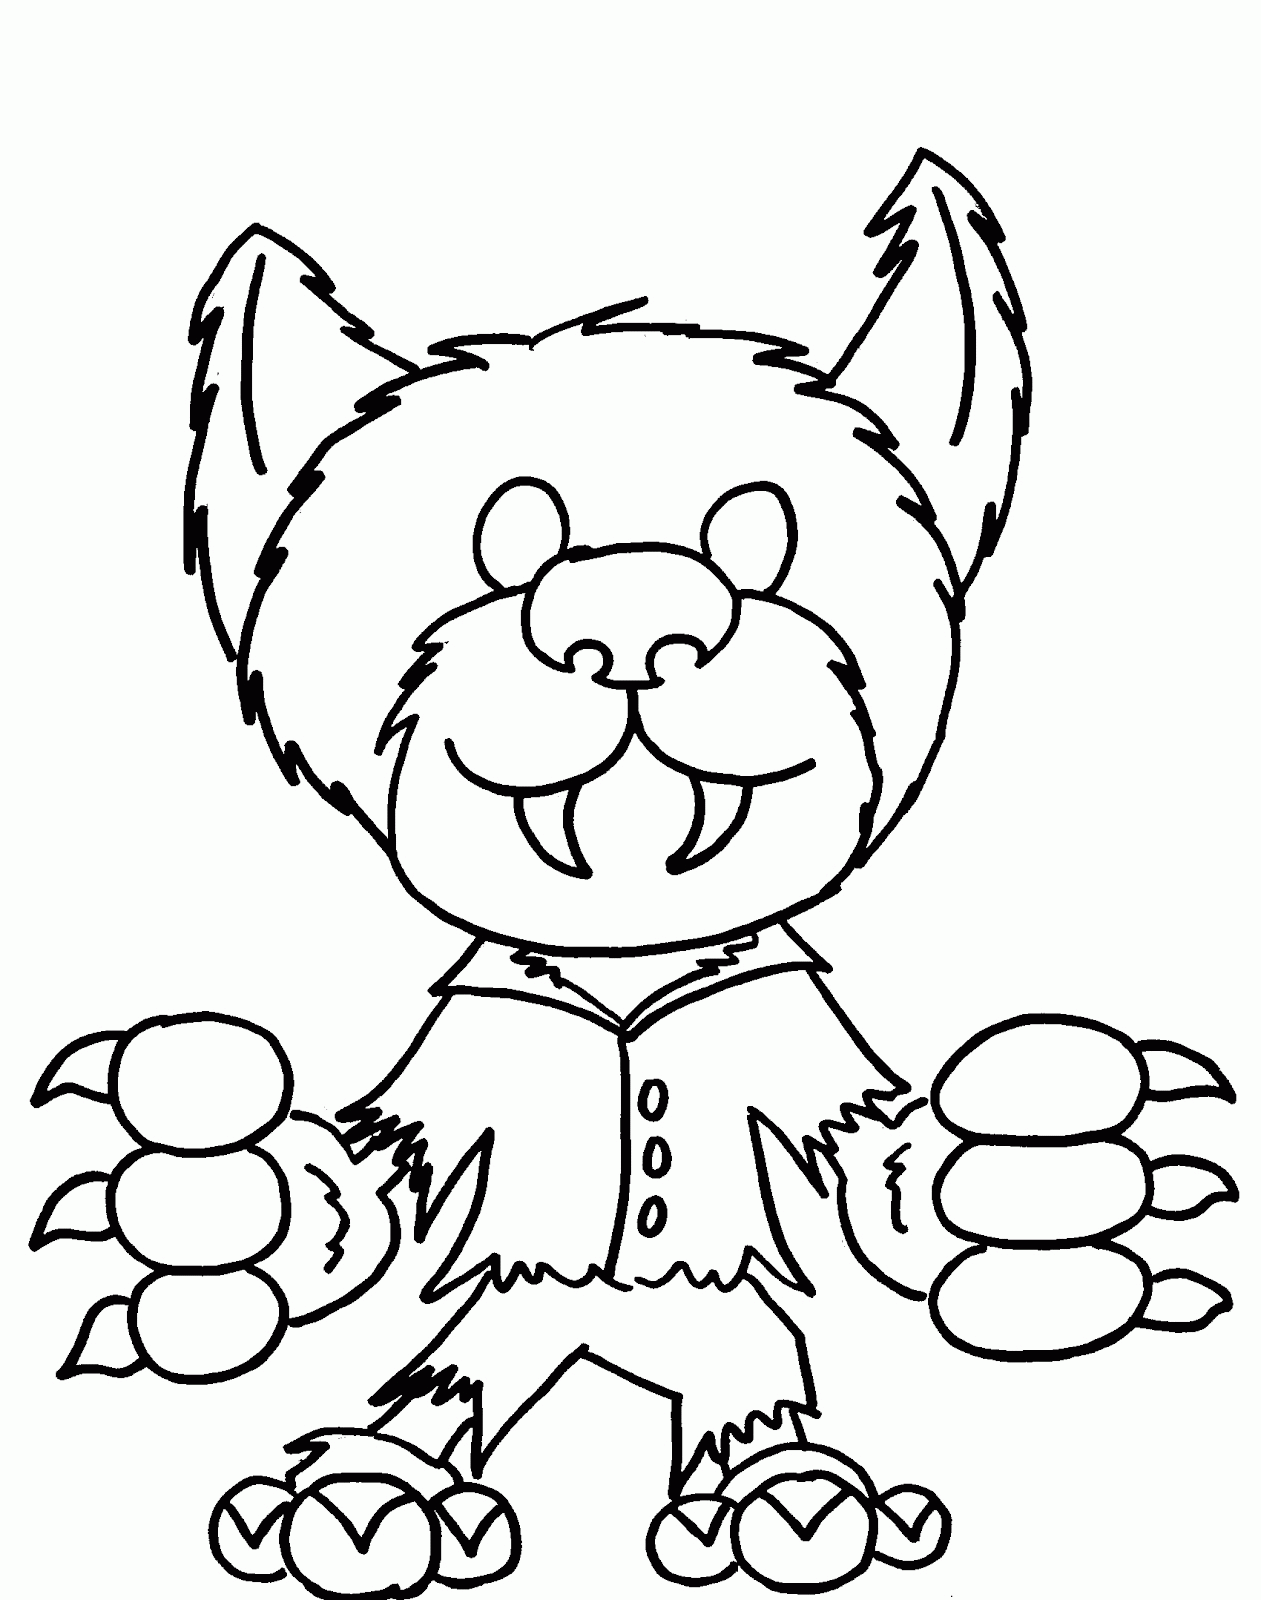 Monster Coloring Pages For Halloween - Coloring Home